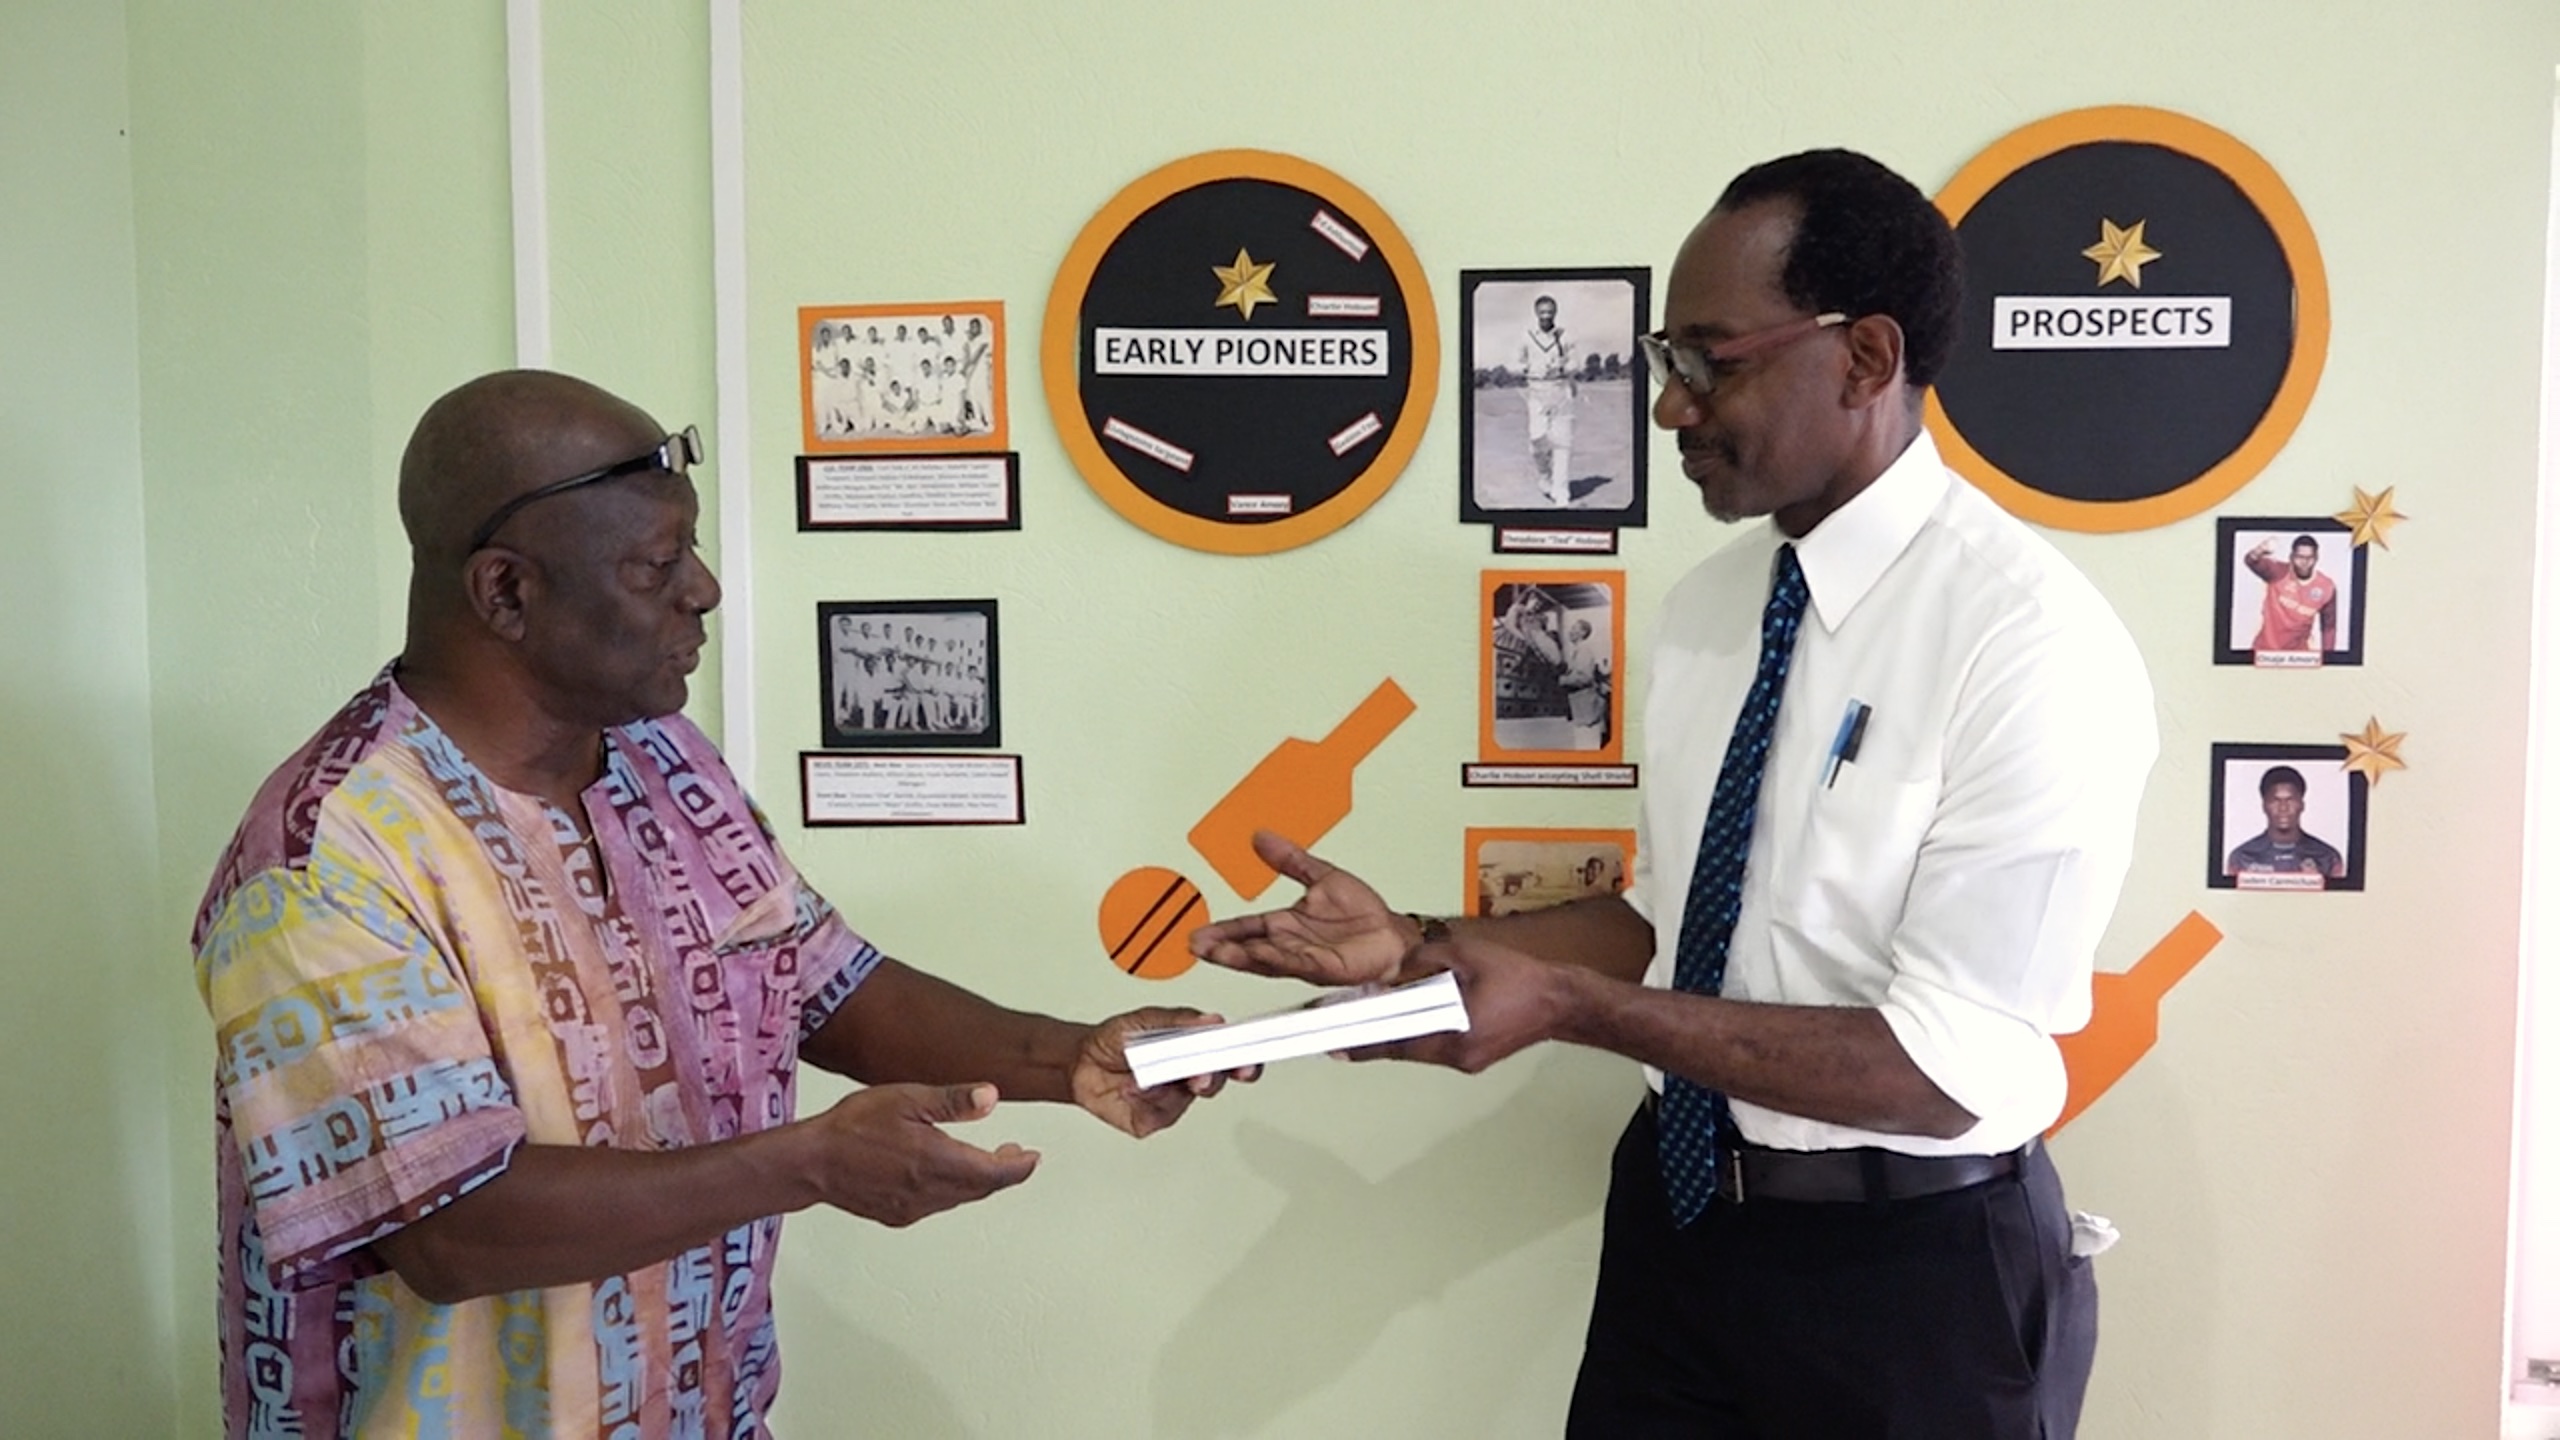 Mr. Stevenson Manners presenting Mr. Kevin Barrett, Permanent Secretary in the Ministry of Education, Library Services, Youth and Sports on Nevis with two copies of his book entitled “The Father Son and Offsprings” for the Nevis Library Services and the Nevis Sports Museum recently at an exhibition at the library in Charlestown